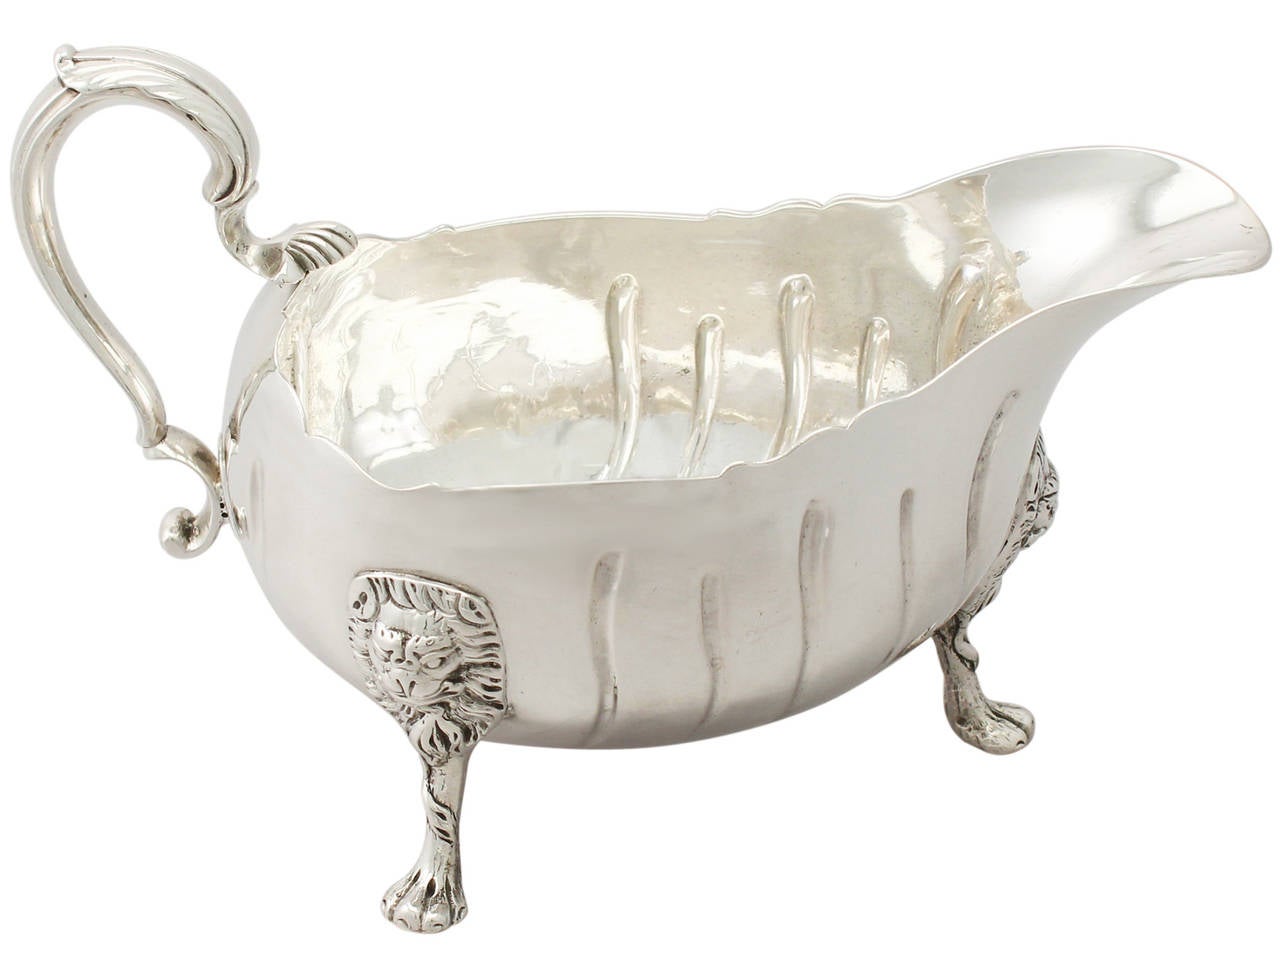 A fine and impressive, large antique George III Irish sterling silver sauceboat / gravy boat; part of our Georgian silver dining collection.

This large and impressive antique Irish sterling silver sauceboat has a plain boat shaped form.

The